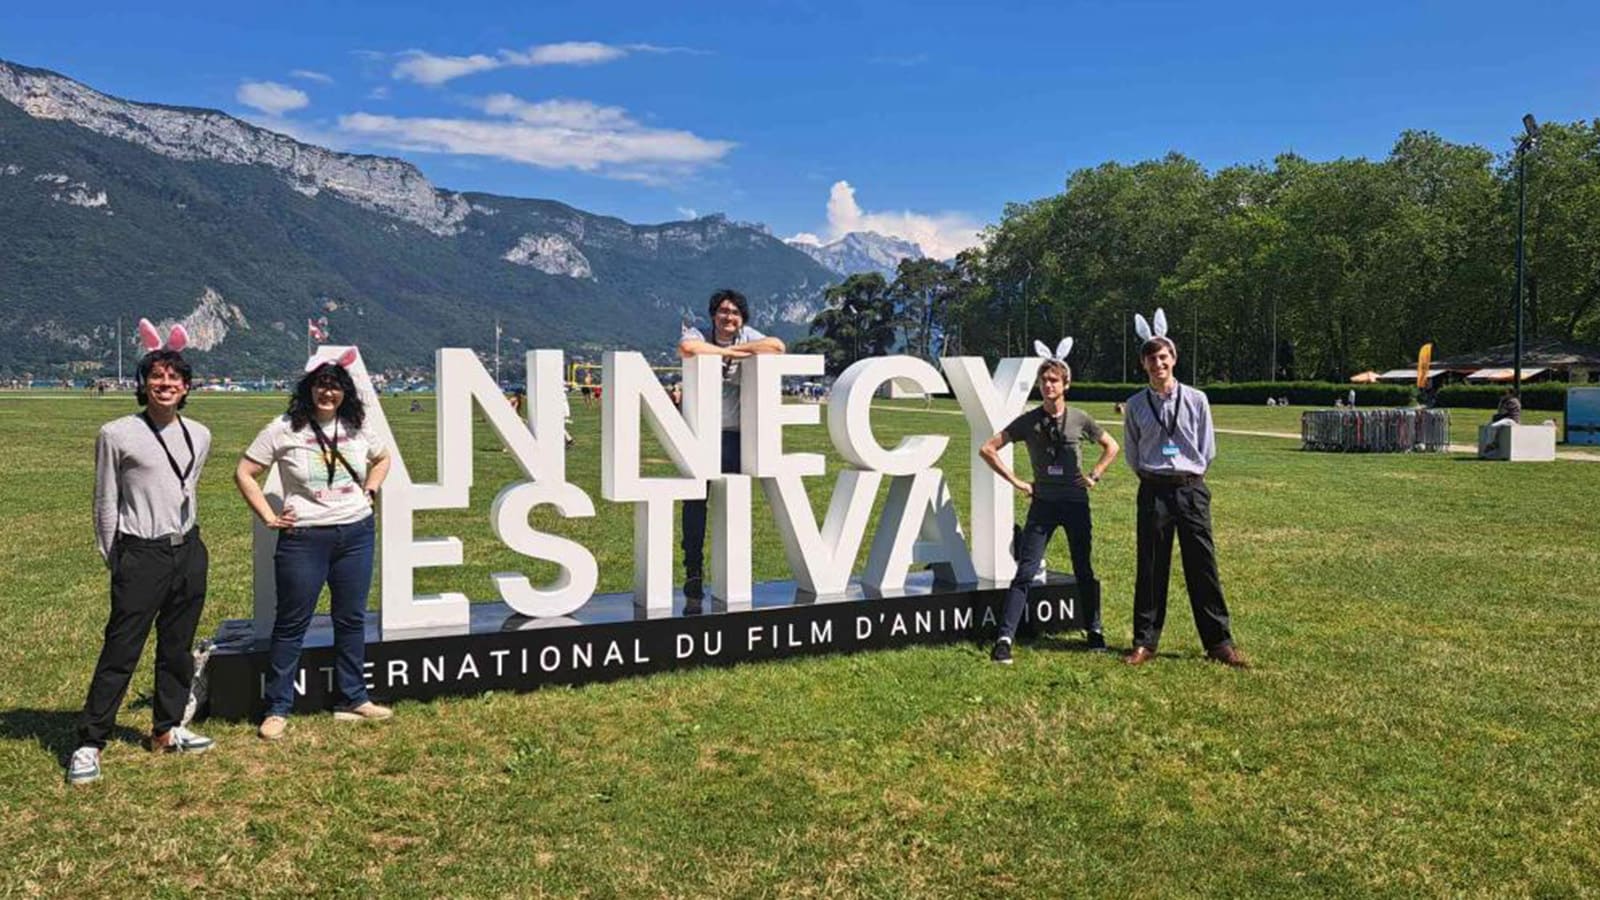 The team’s picture at Annecy Festival 2023